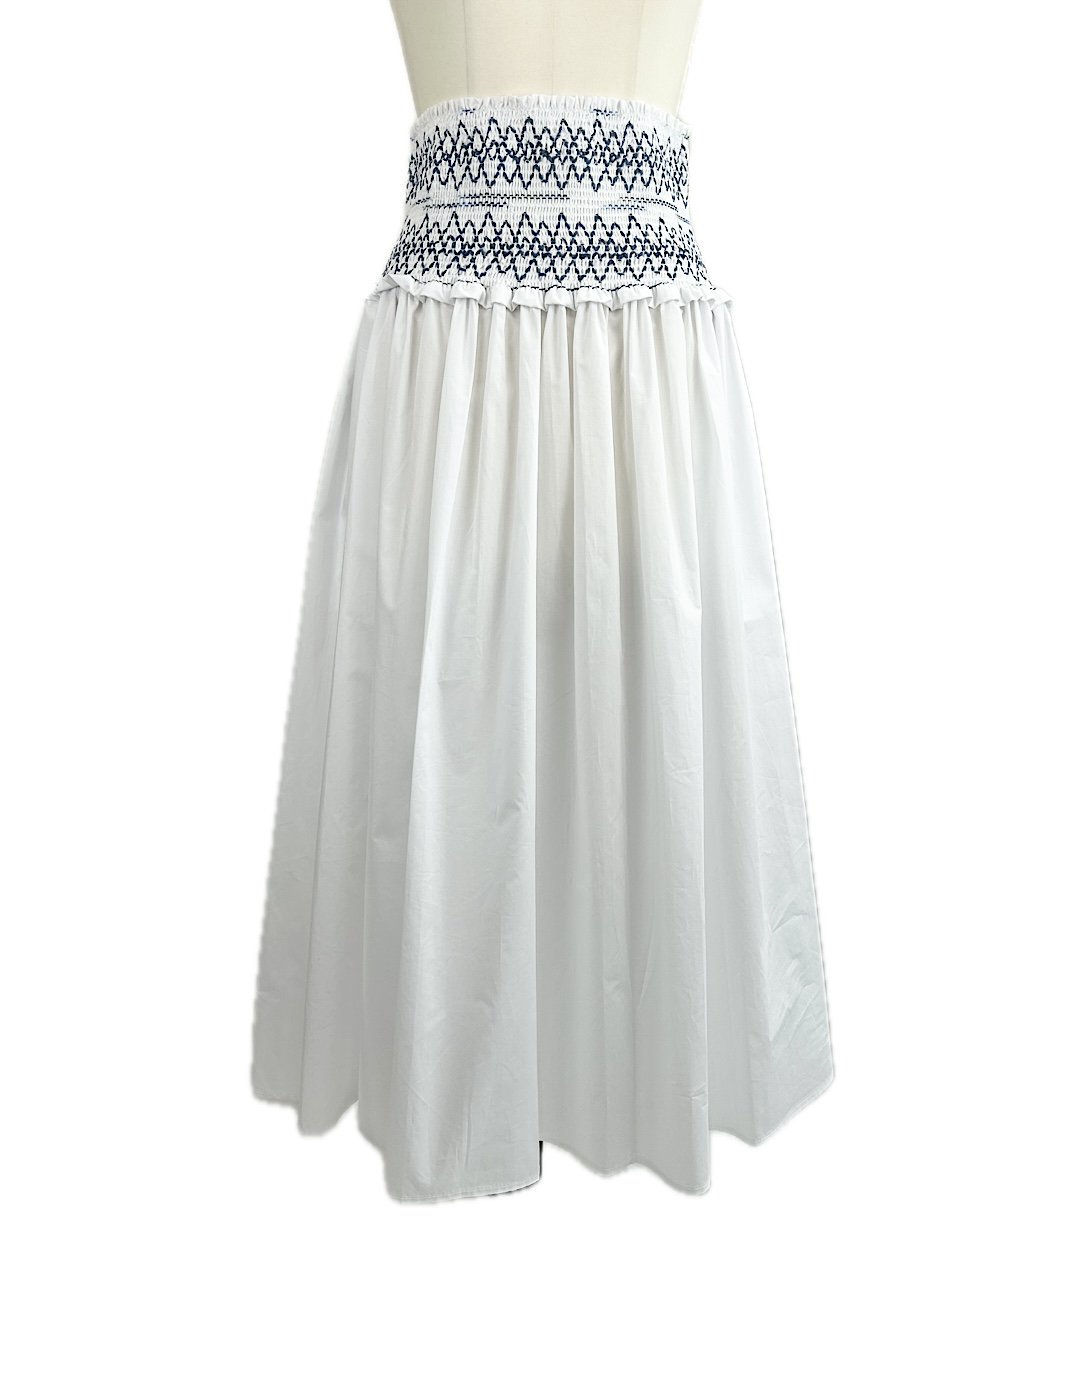 <img class='new_mark_img1' src='https://img.shop-pro.jp/img/new/icons47.gif' style='border:none;display:inline;margin:0px;padding:0px;width:auto;' />30offMEIMEIJ / EMBROIDERY COTTON SKIRT